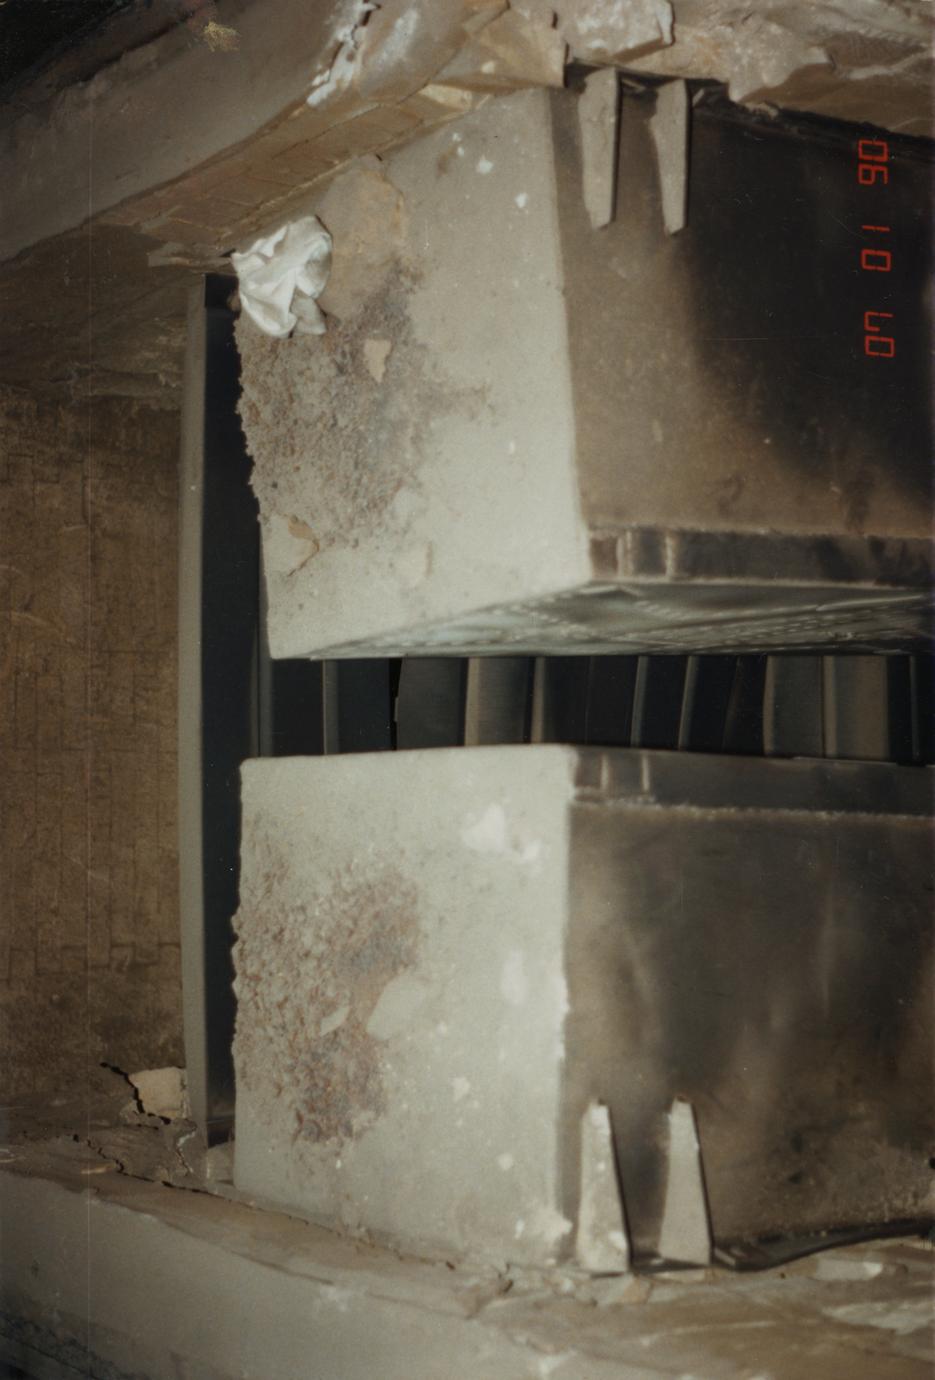 American Brass factory interior during remodeling